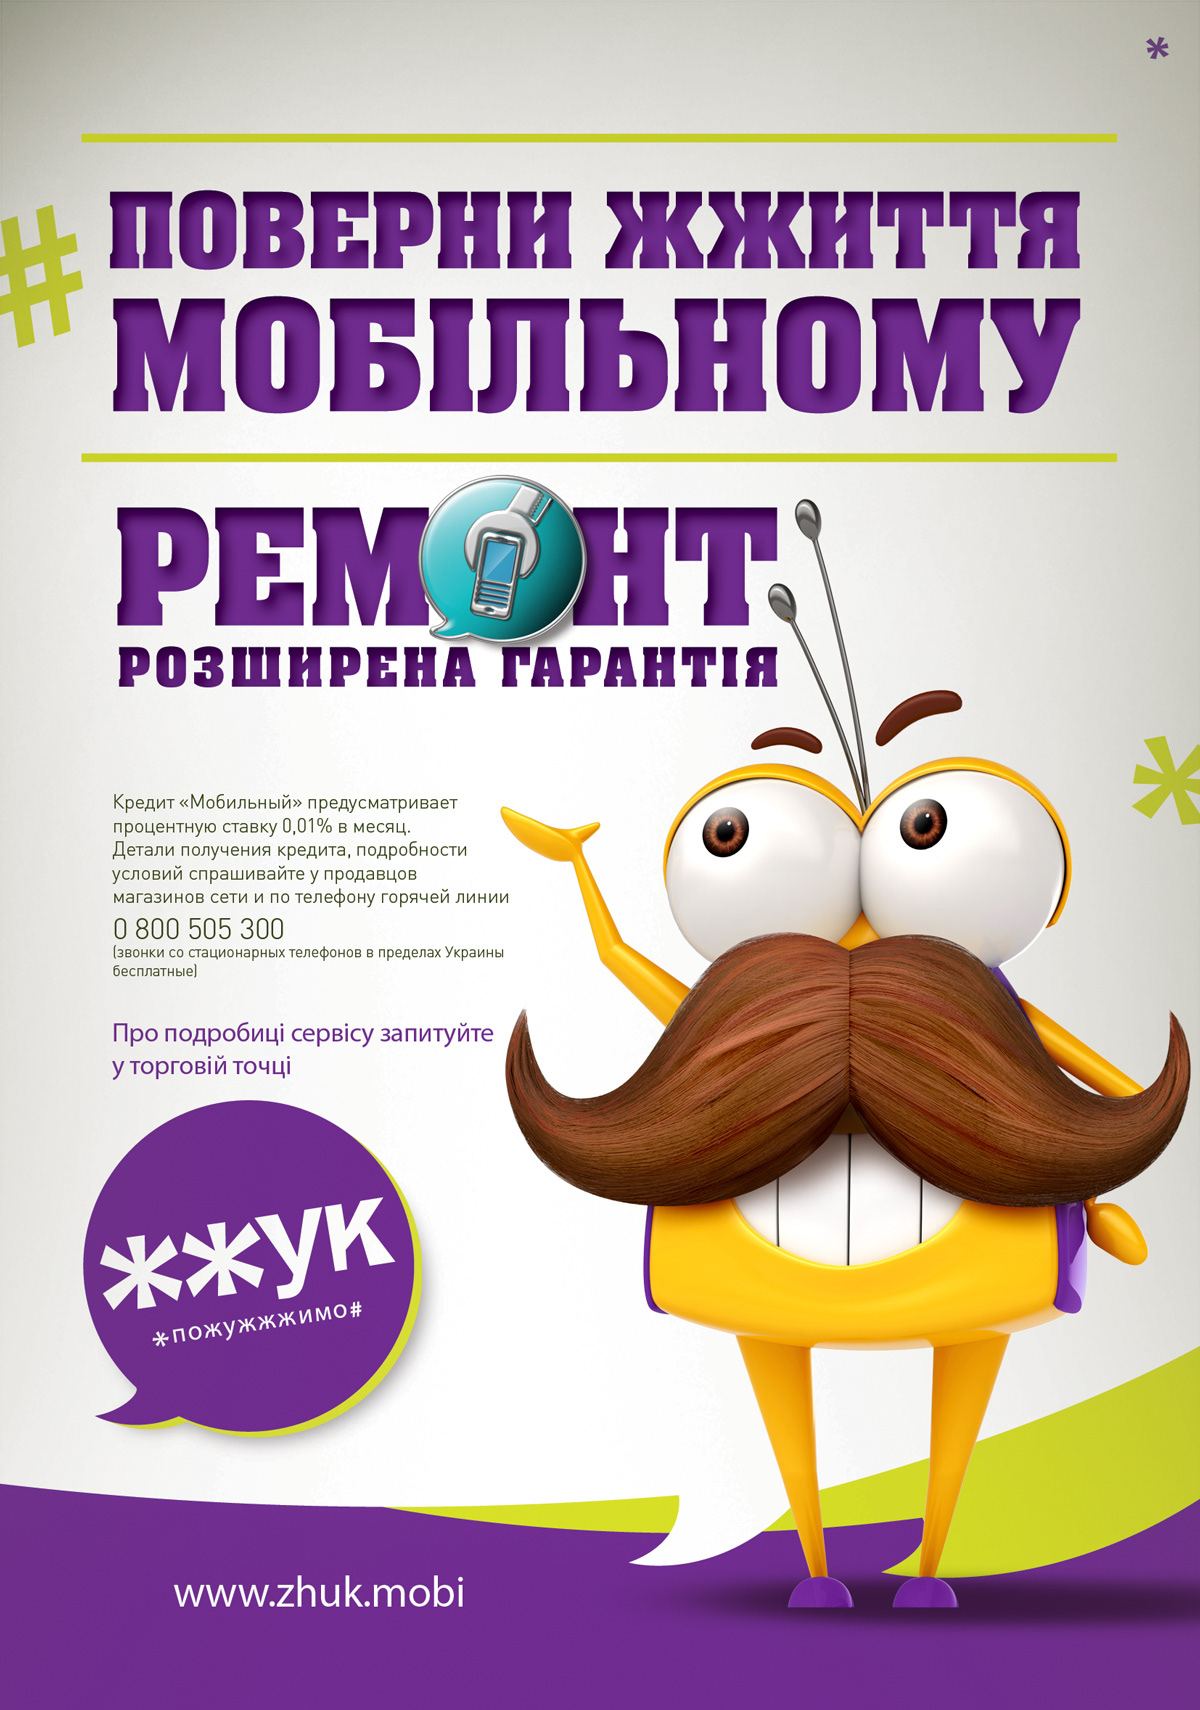 Zhzhuk bug beetle dor Hero 3D corporate identity brand lilac funny Smart mustache Character Emotional